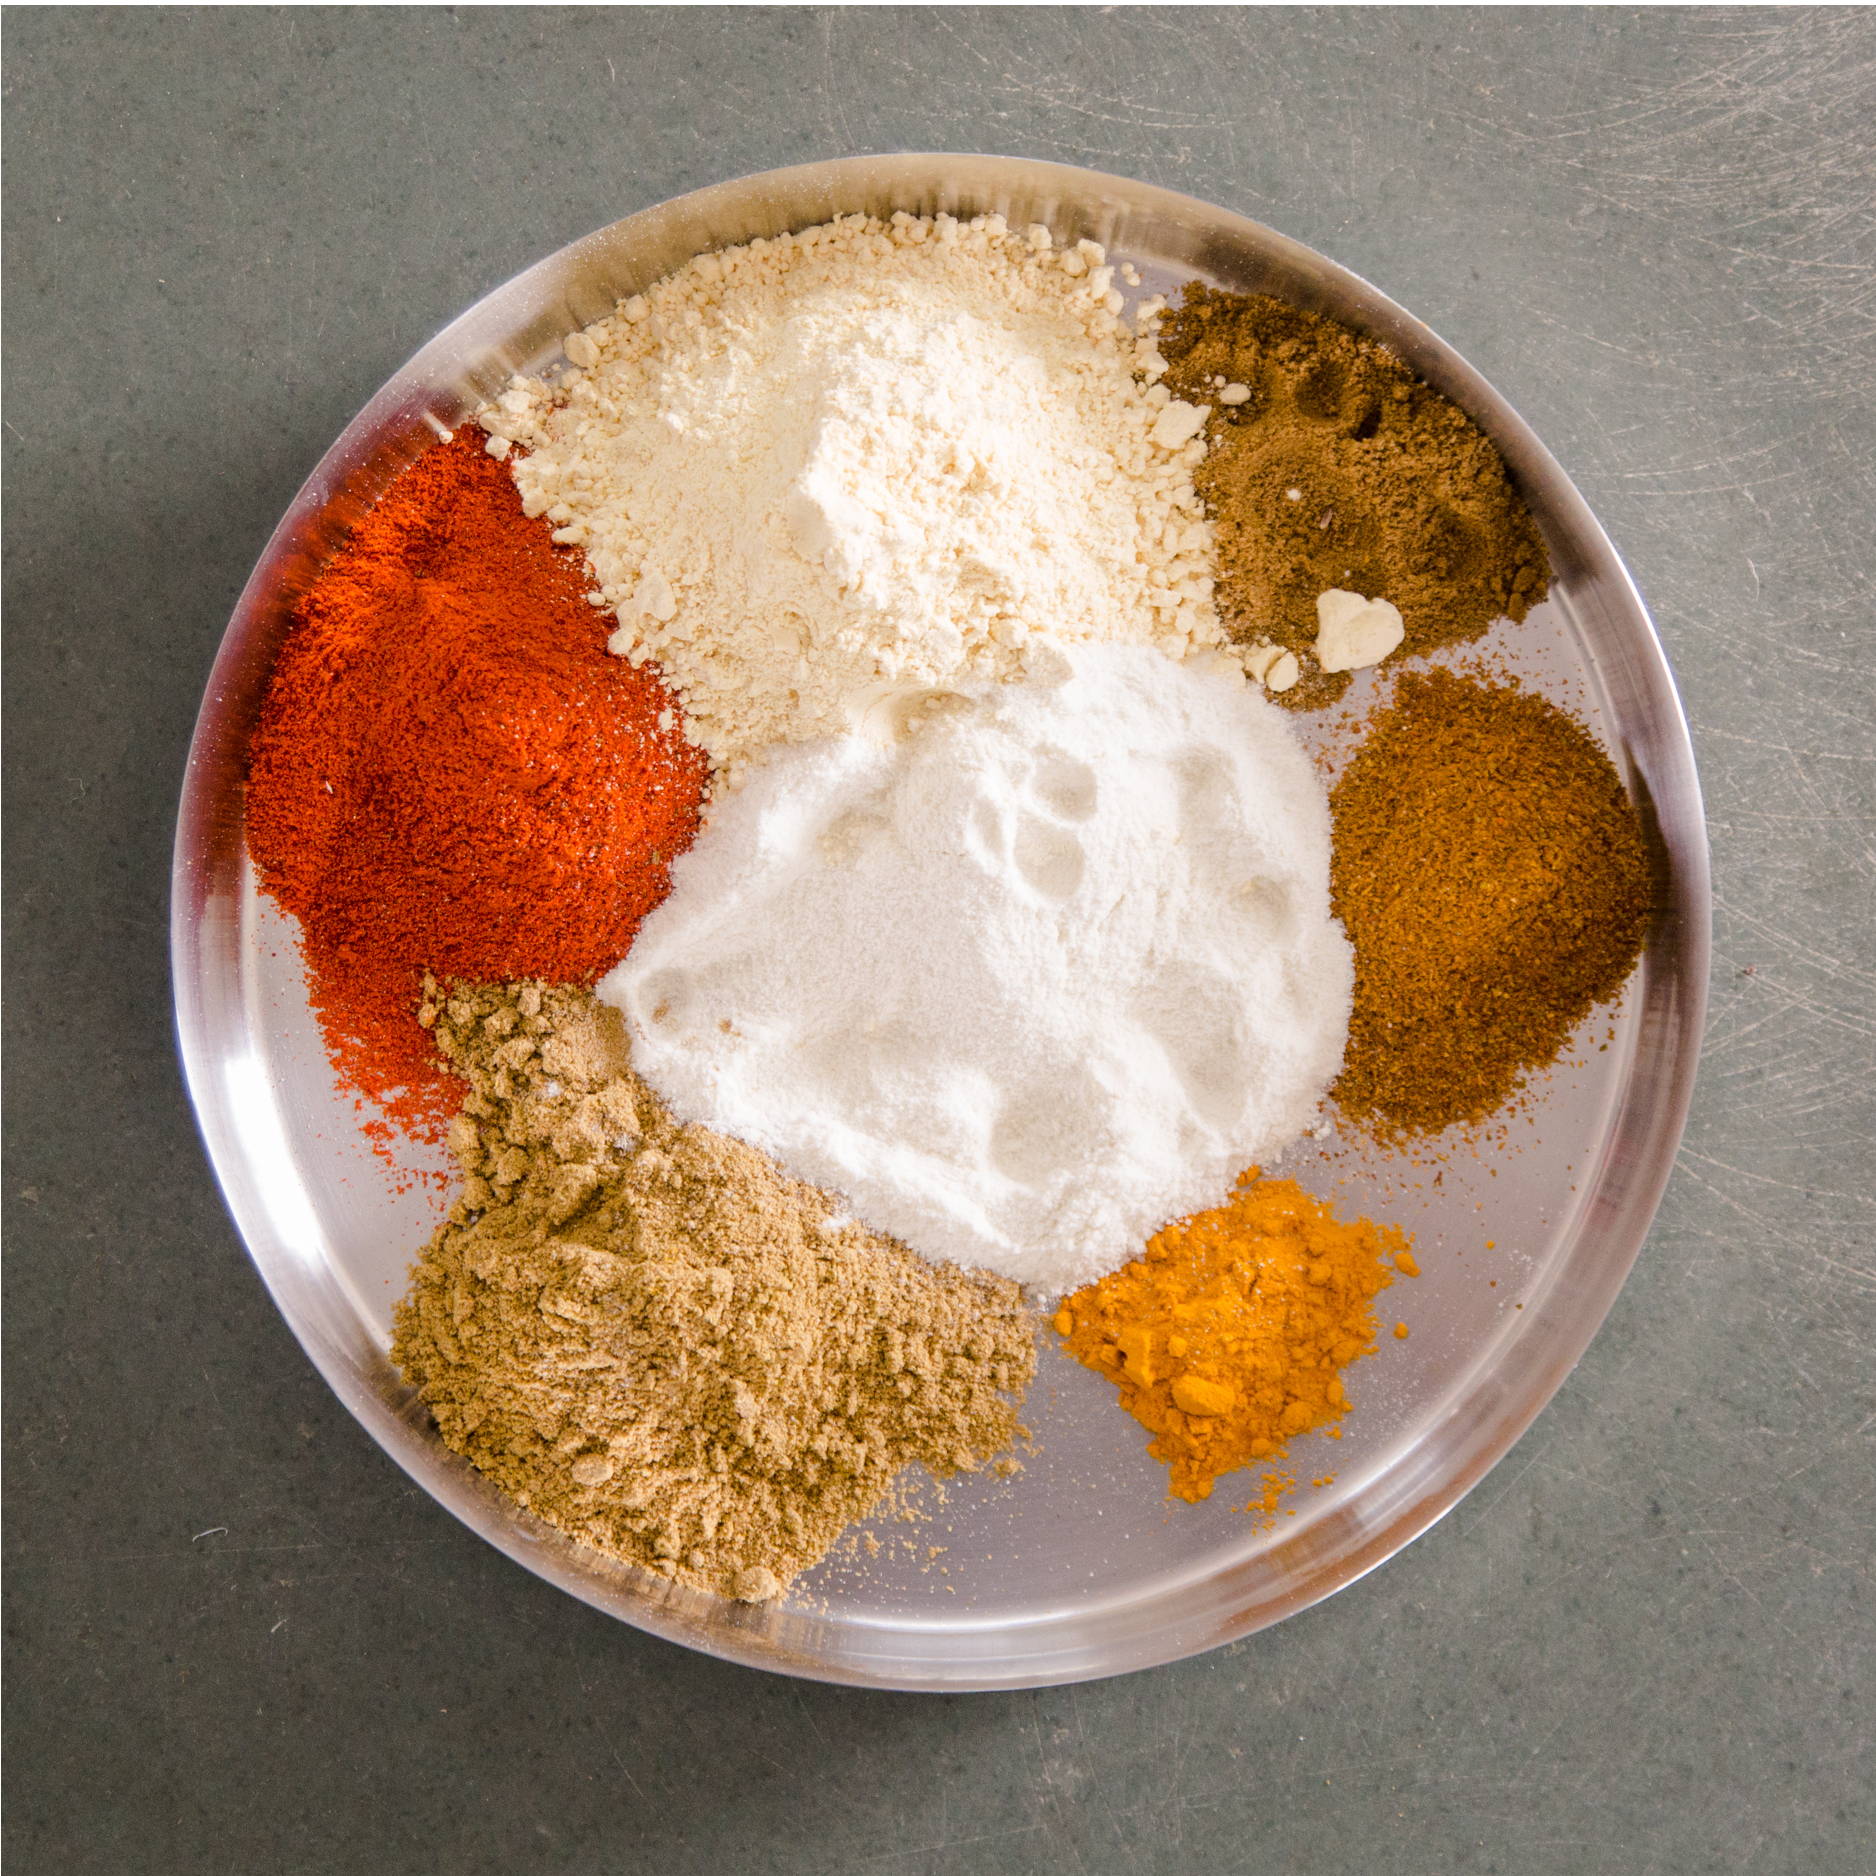 A silver plate sits on a concrete floor. It is holding piles of different Indian spices such as curry, turmeric, and cayenne.